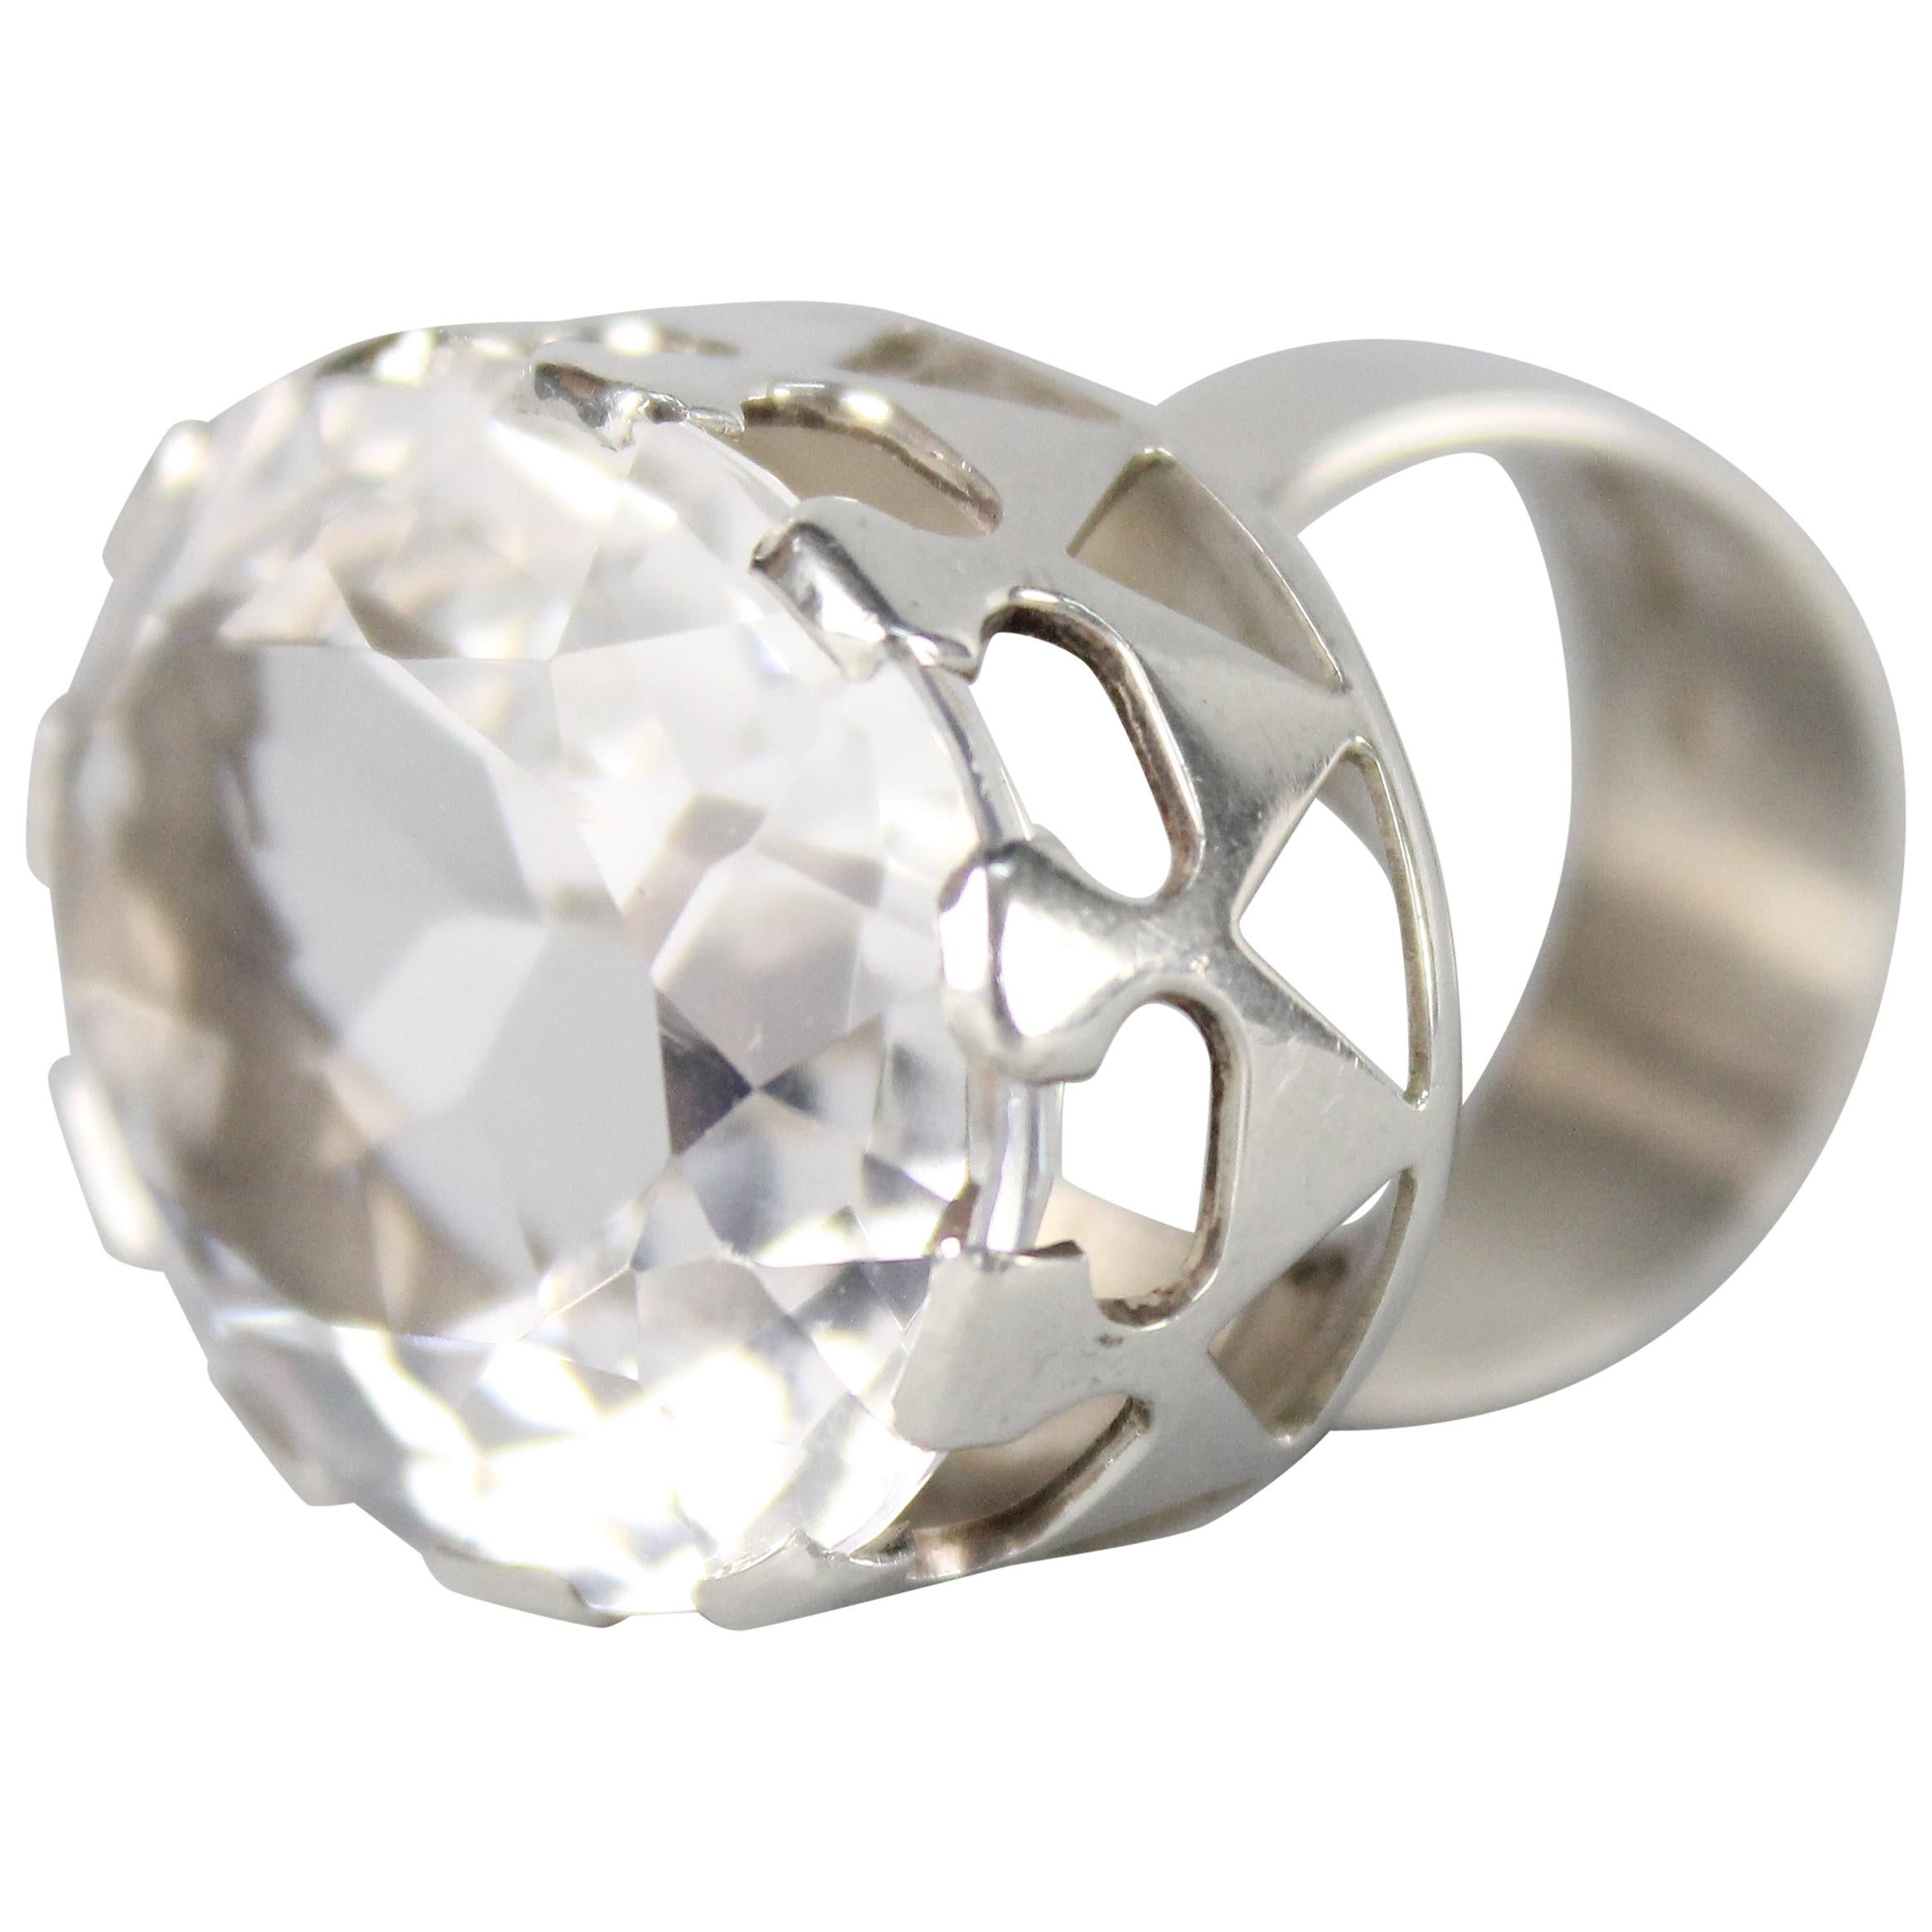 Modernist Ring in Silver and a Large Rock Crystal by Kaplan, Stockholm, 1968 For Sale